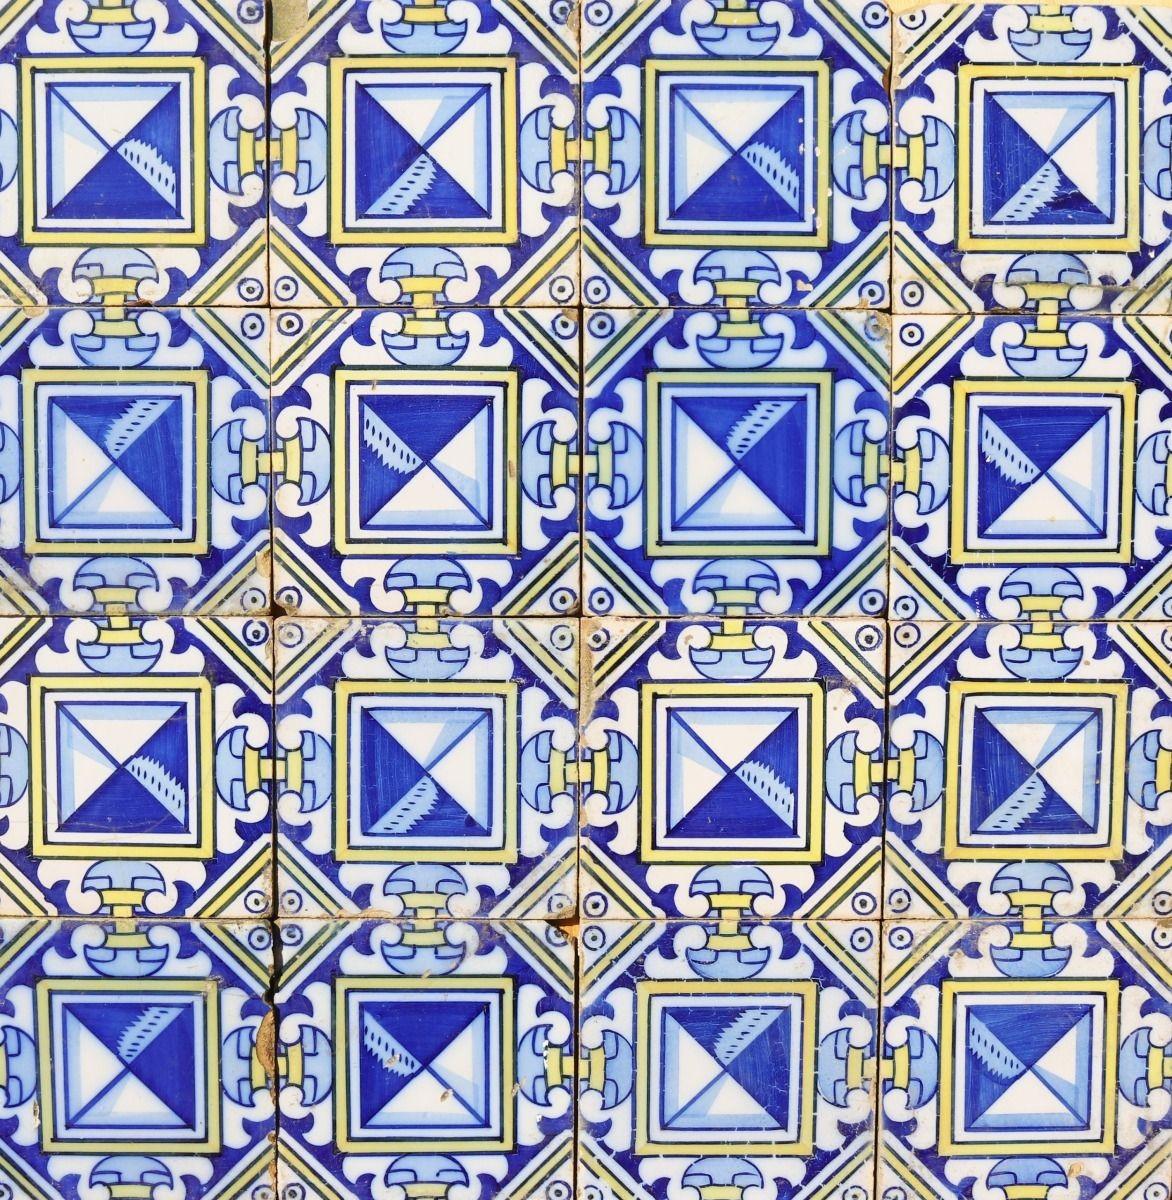 A reclaimed tile panel consisting of 16 glazed ceramic tiles decorated in blue and yellow. There are a further 9 tiles included, but not shown. This could be used as a splash back, or wall decoration. Overall size of panel as pictured 60 x 60 cm